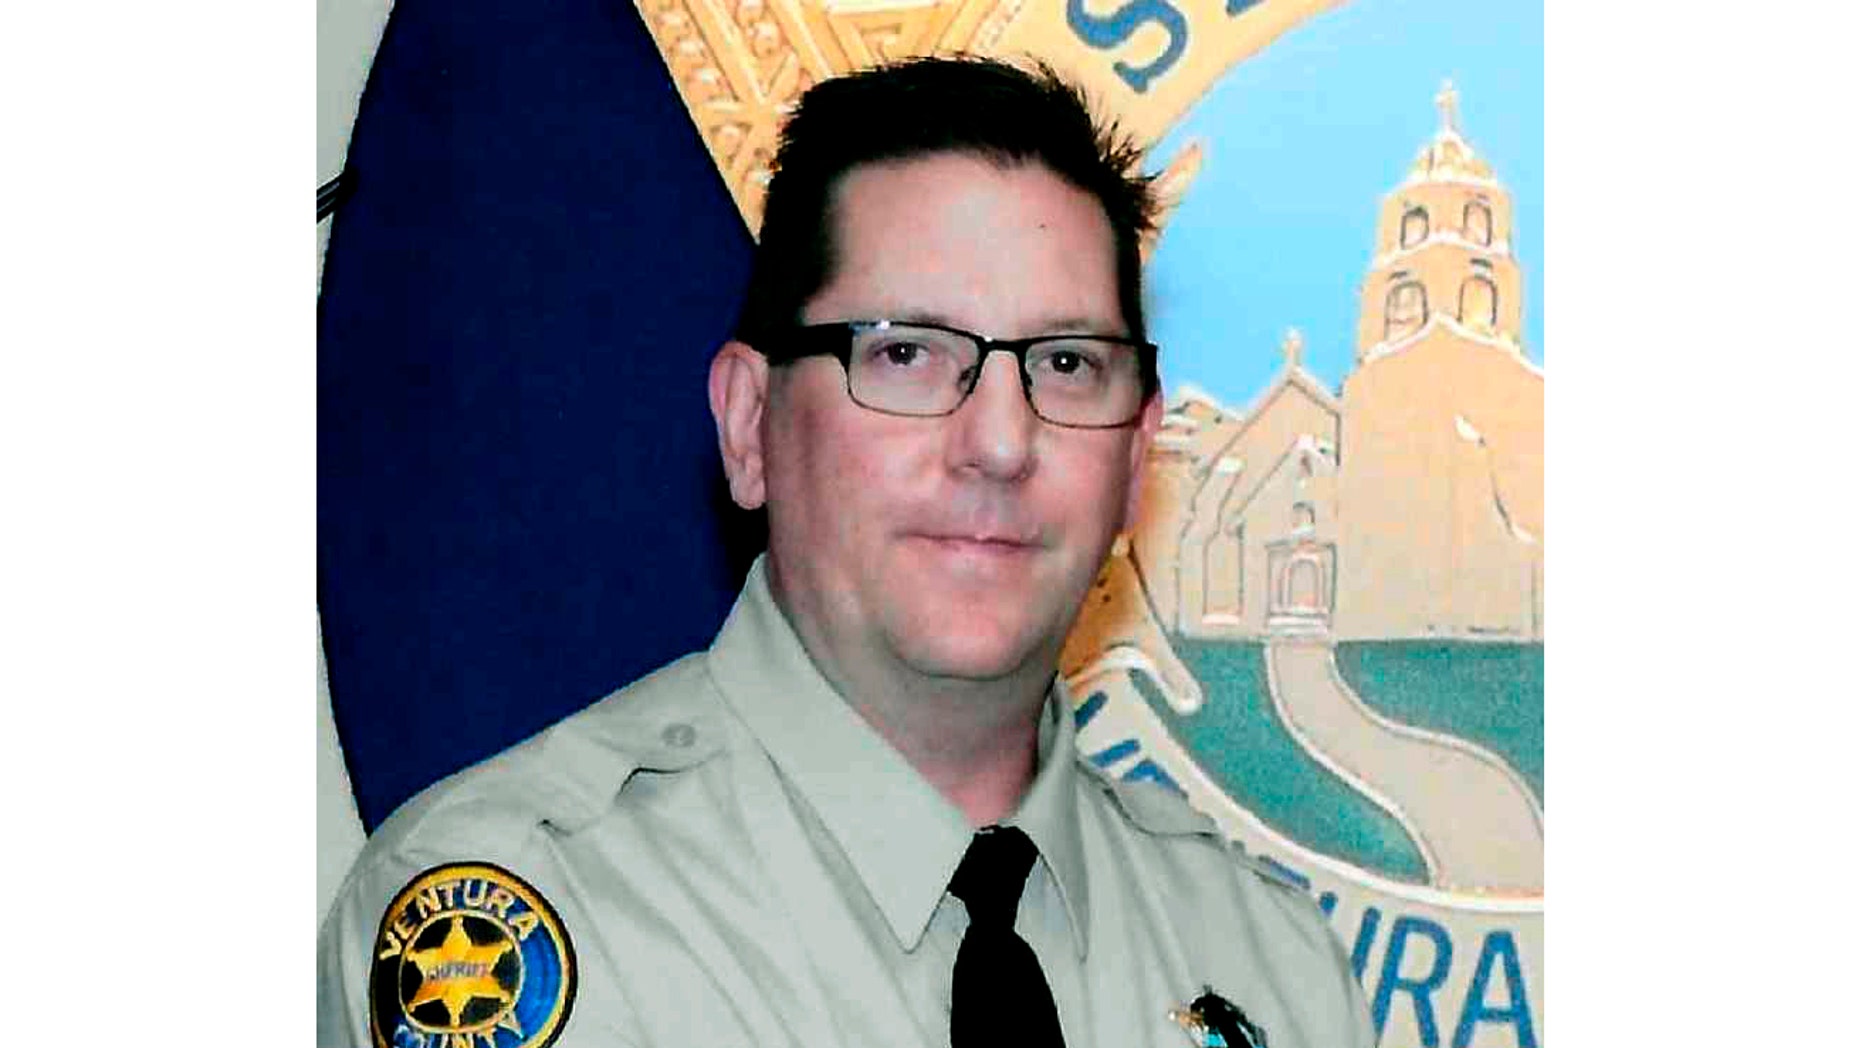 FILE - This photo is provided by the Sheriff's County Sheriff's County Ventura County Sheriff's Sgt. Ron Helus, who was killed Wednesday, Nov. 7, 2018, in a deadly shooting at a country music bar in Thousand Oaks, Calif. Fellow Sheriff 's deputies knew Helus had a cop cop, someone who, as far as he could, would go to the ends of the earth to solve crime. On Thursday, Nov. 15, 2018, Helus' colleagues and others will gather at a Westlake Village, California, church, where he will be hailed as a hero. (Ventura County Sheriff's Department via AP, File)